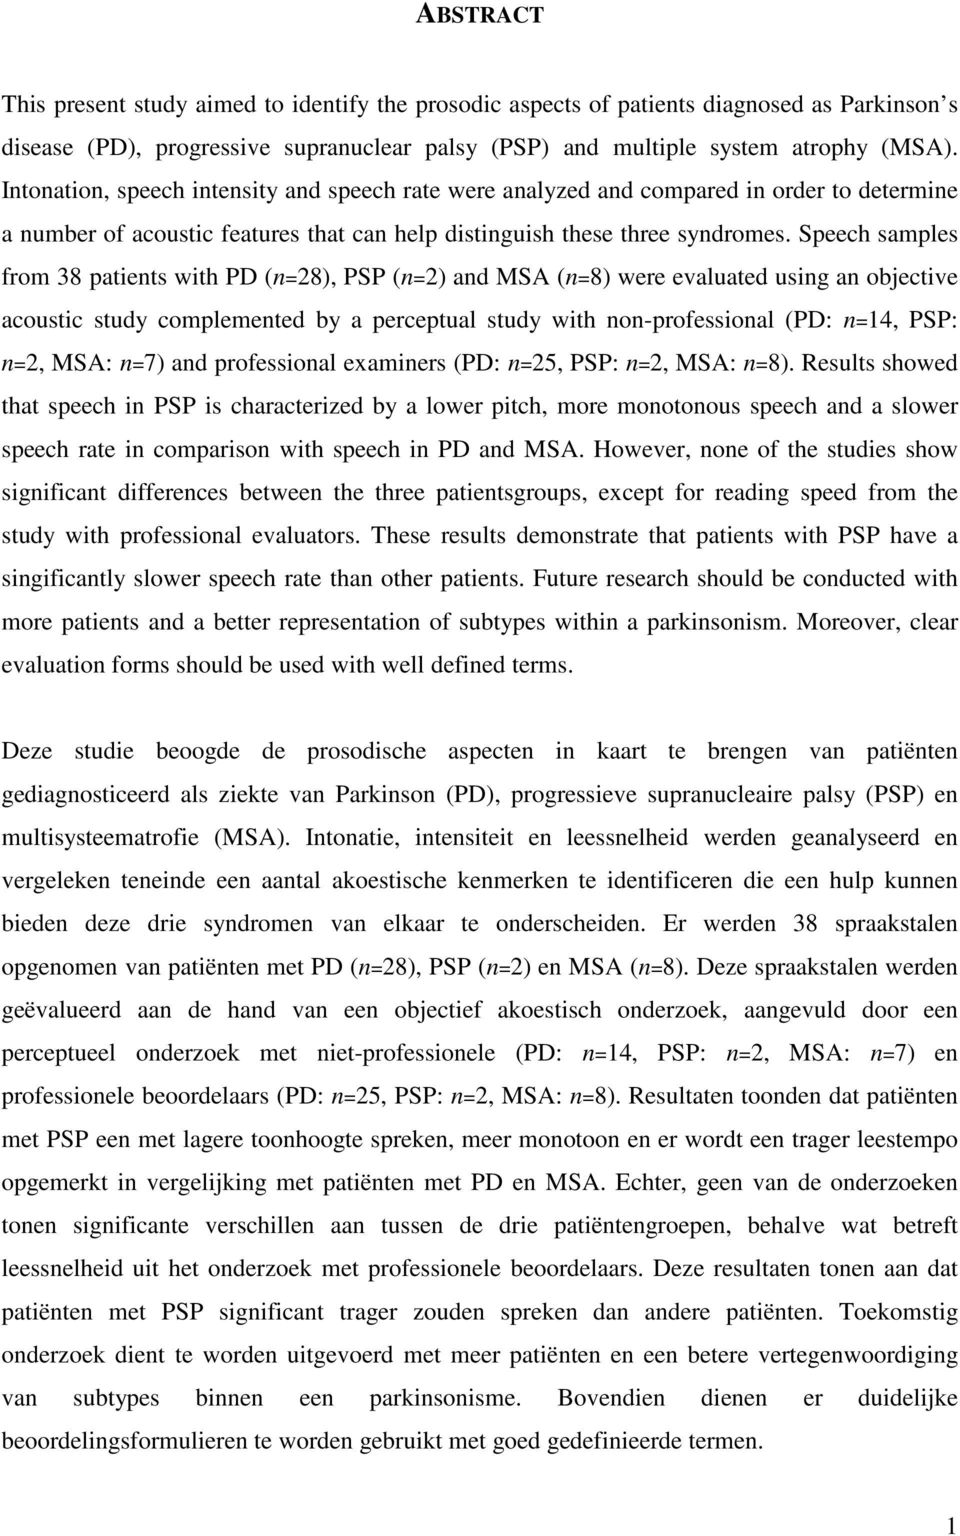 Speech samples from 38 patients with PD (n=28), PSP (n=2) and MSA (n=8) were evaluated using an objective acoustic study complemented by a perceptual study with non-professional (PD: n=14, PSP: n=2,